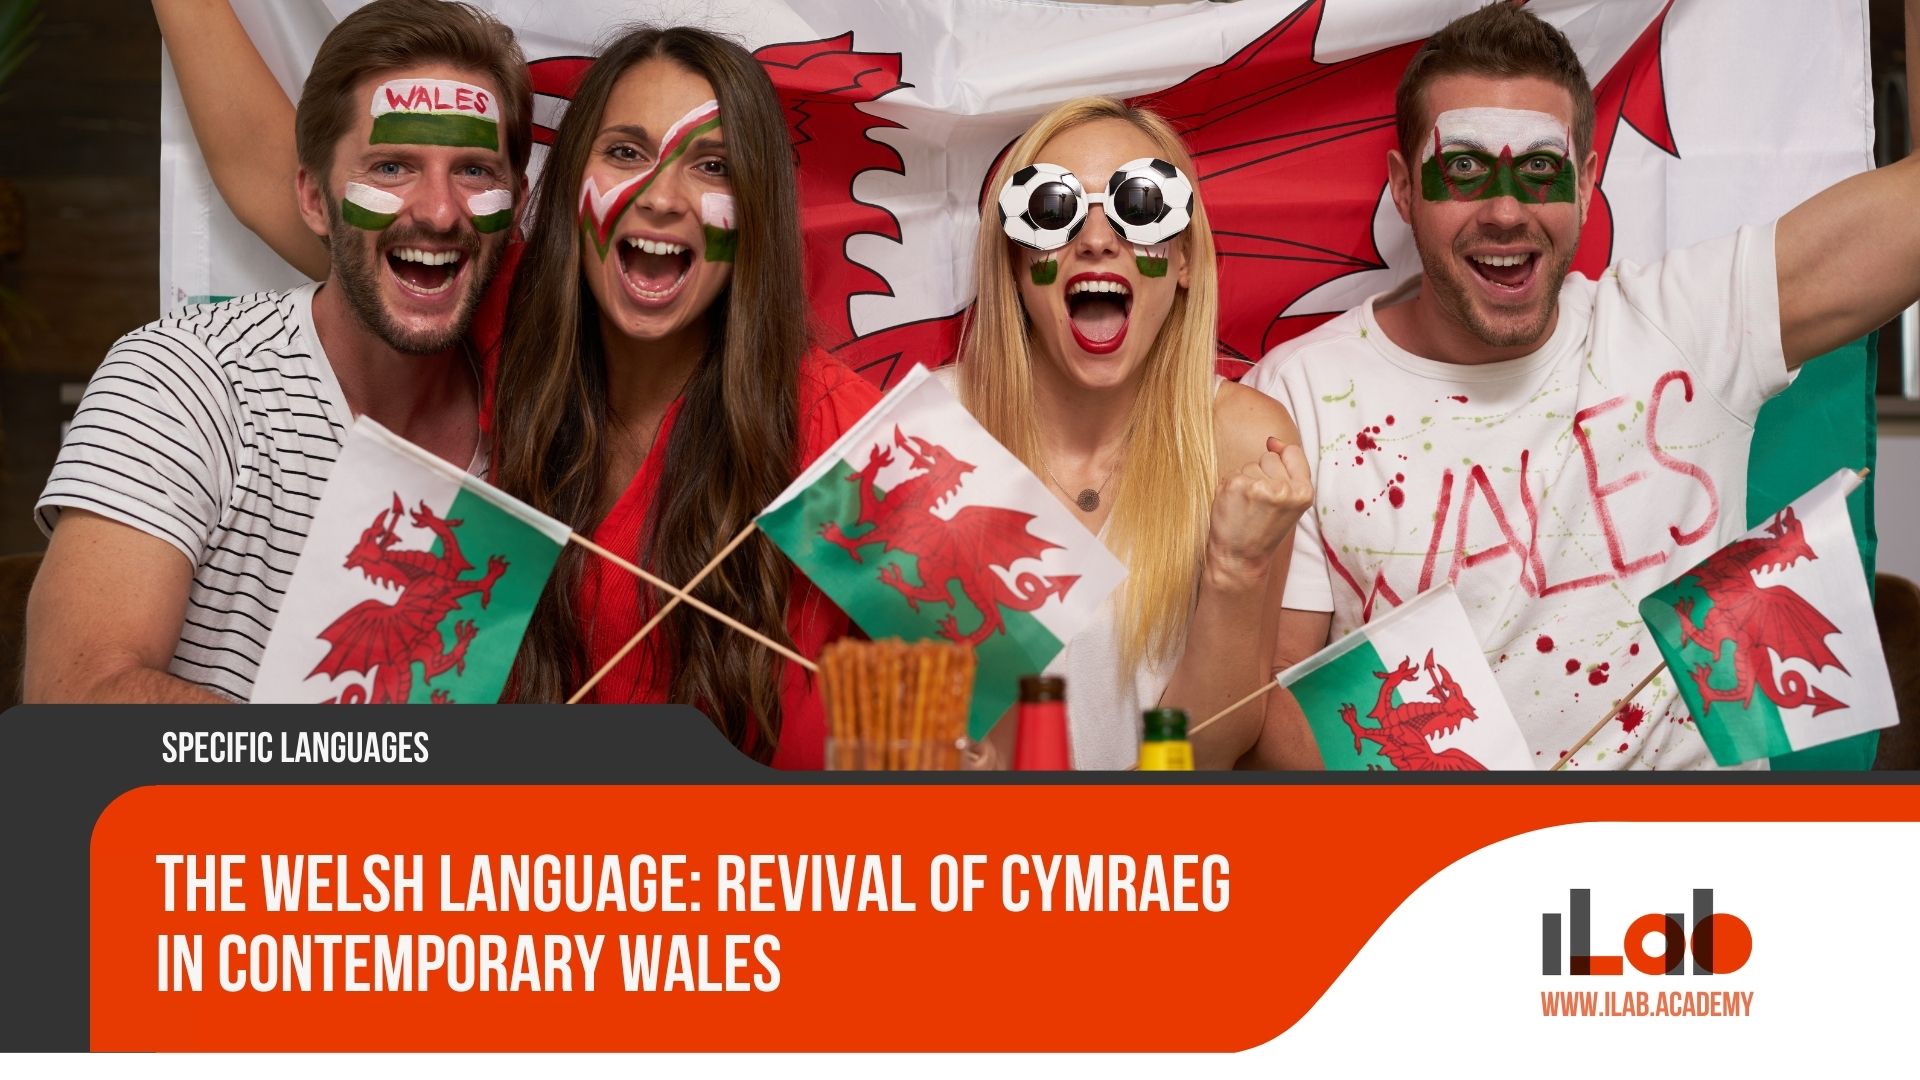 The Welsh Language: Revival of Cymraeg in Contemporary Wales